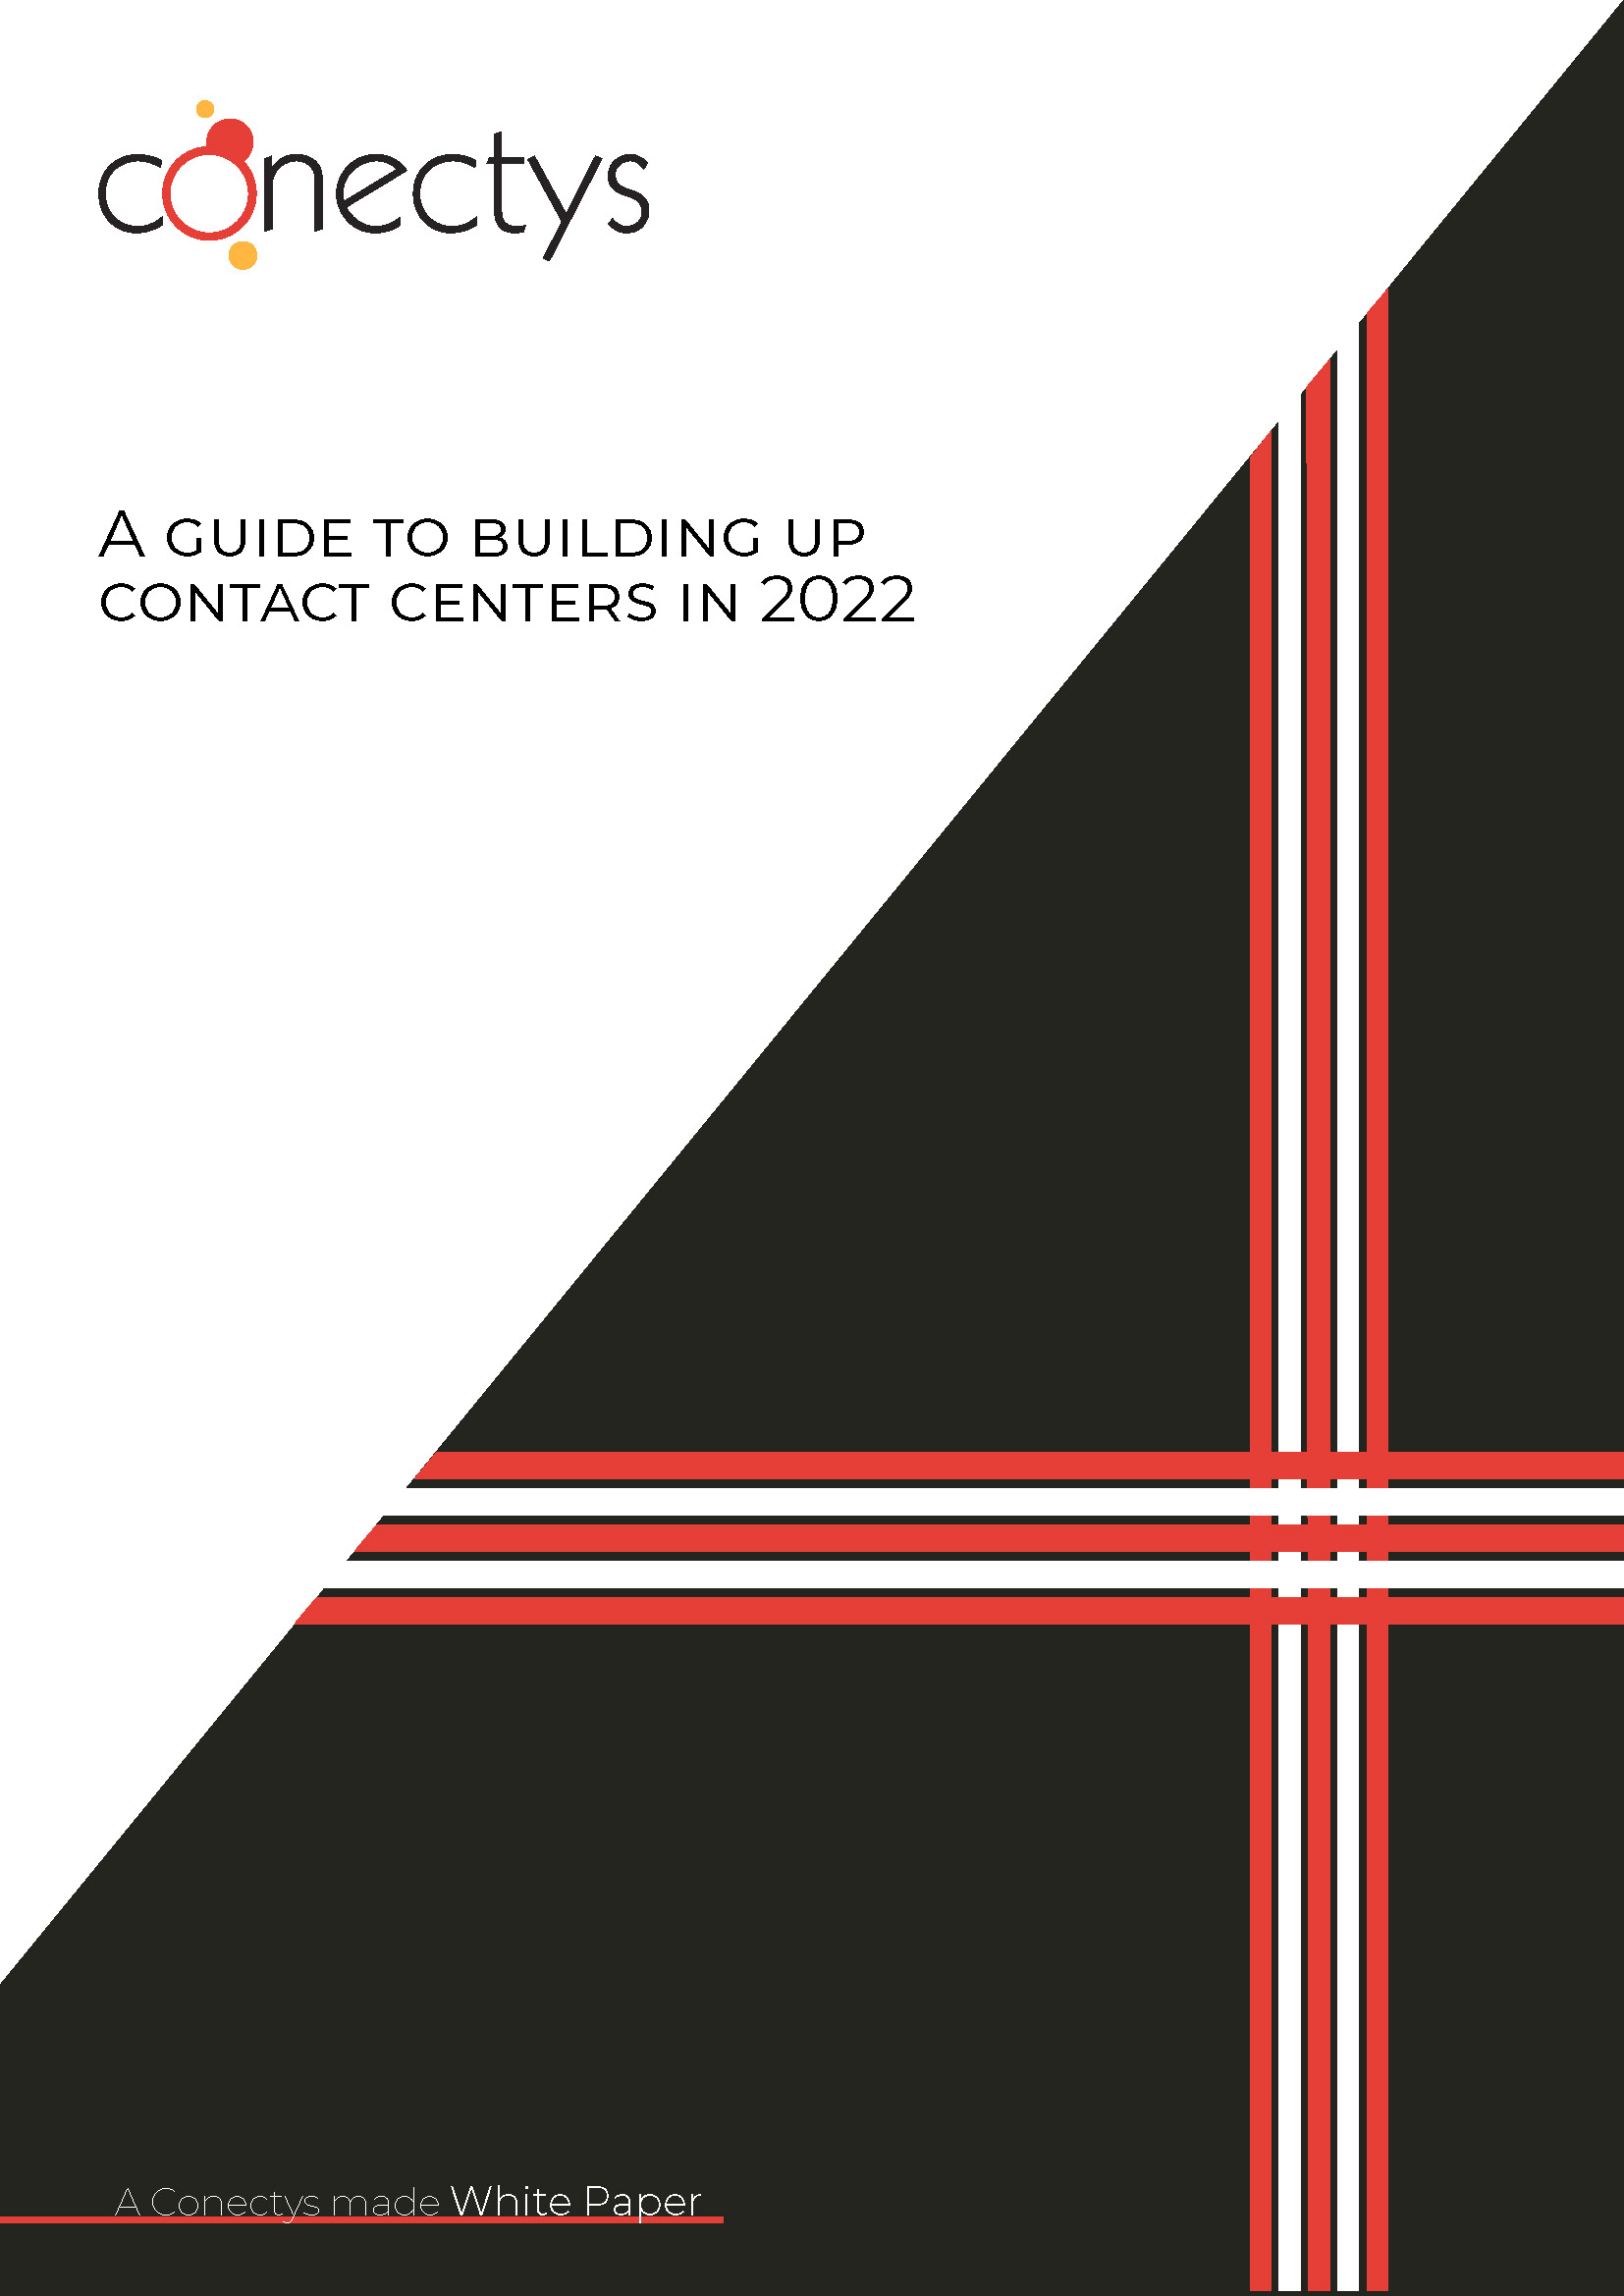 A guide to building up contact centers in 2022